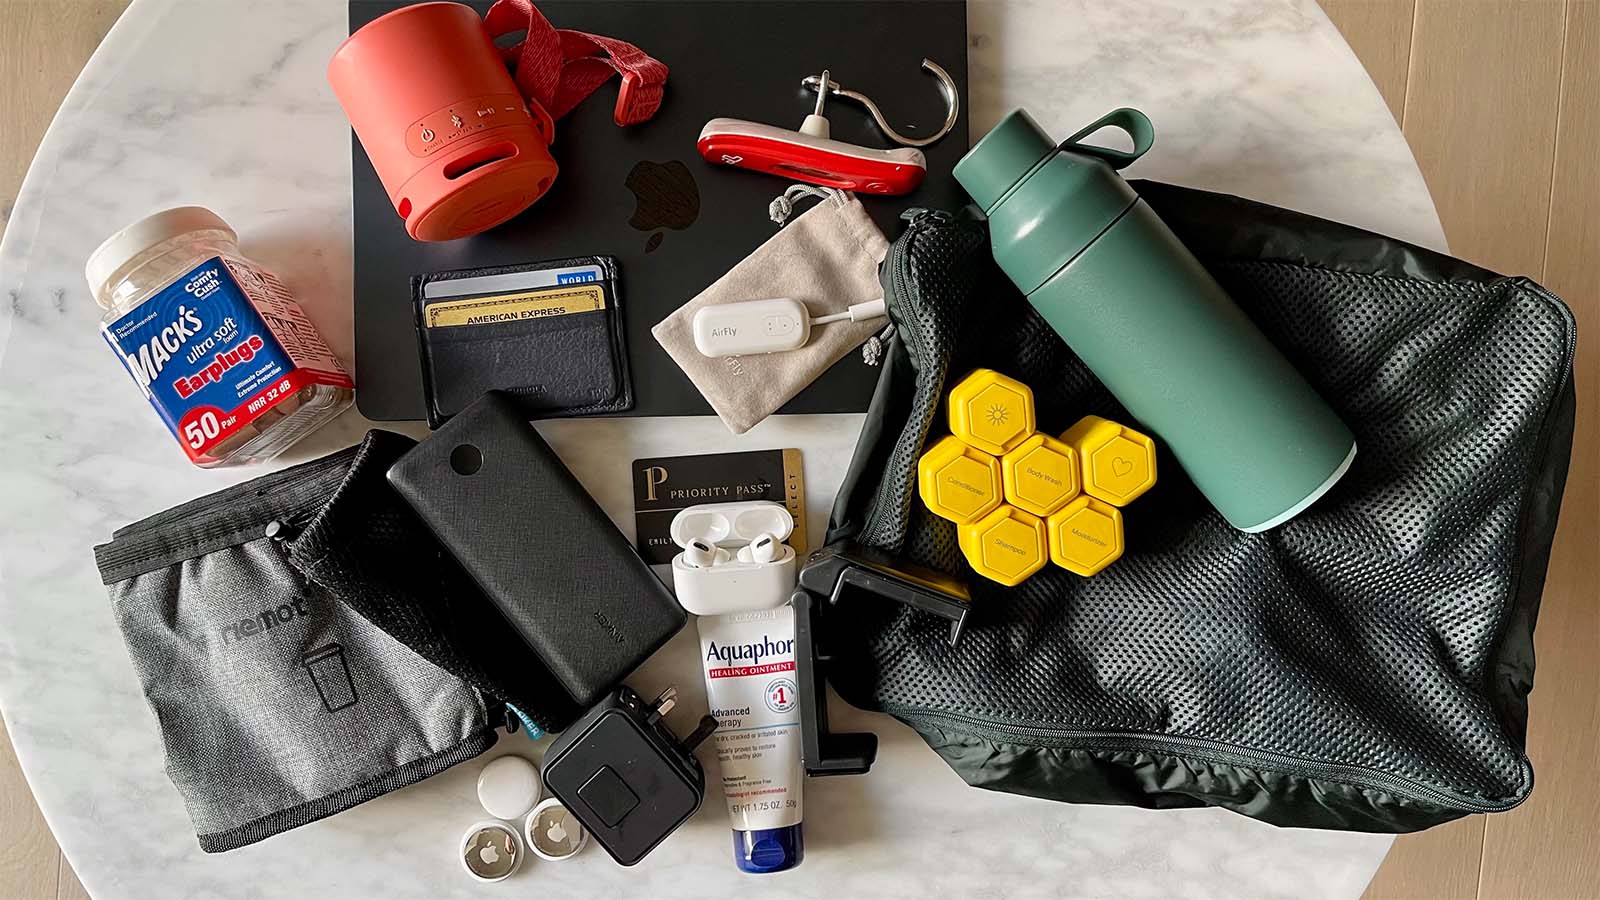 Most Essential Item to Pack for Travel: Electronics Dopp Kit